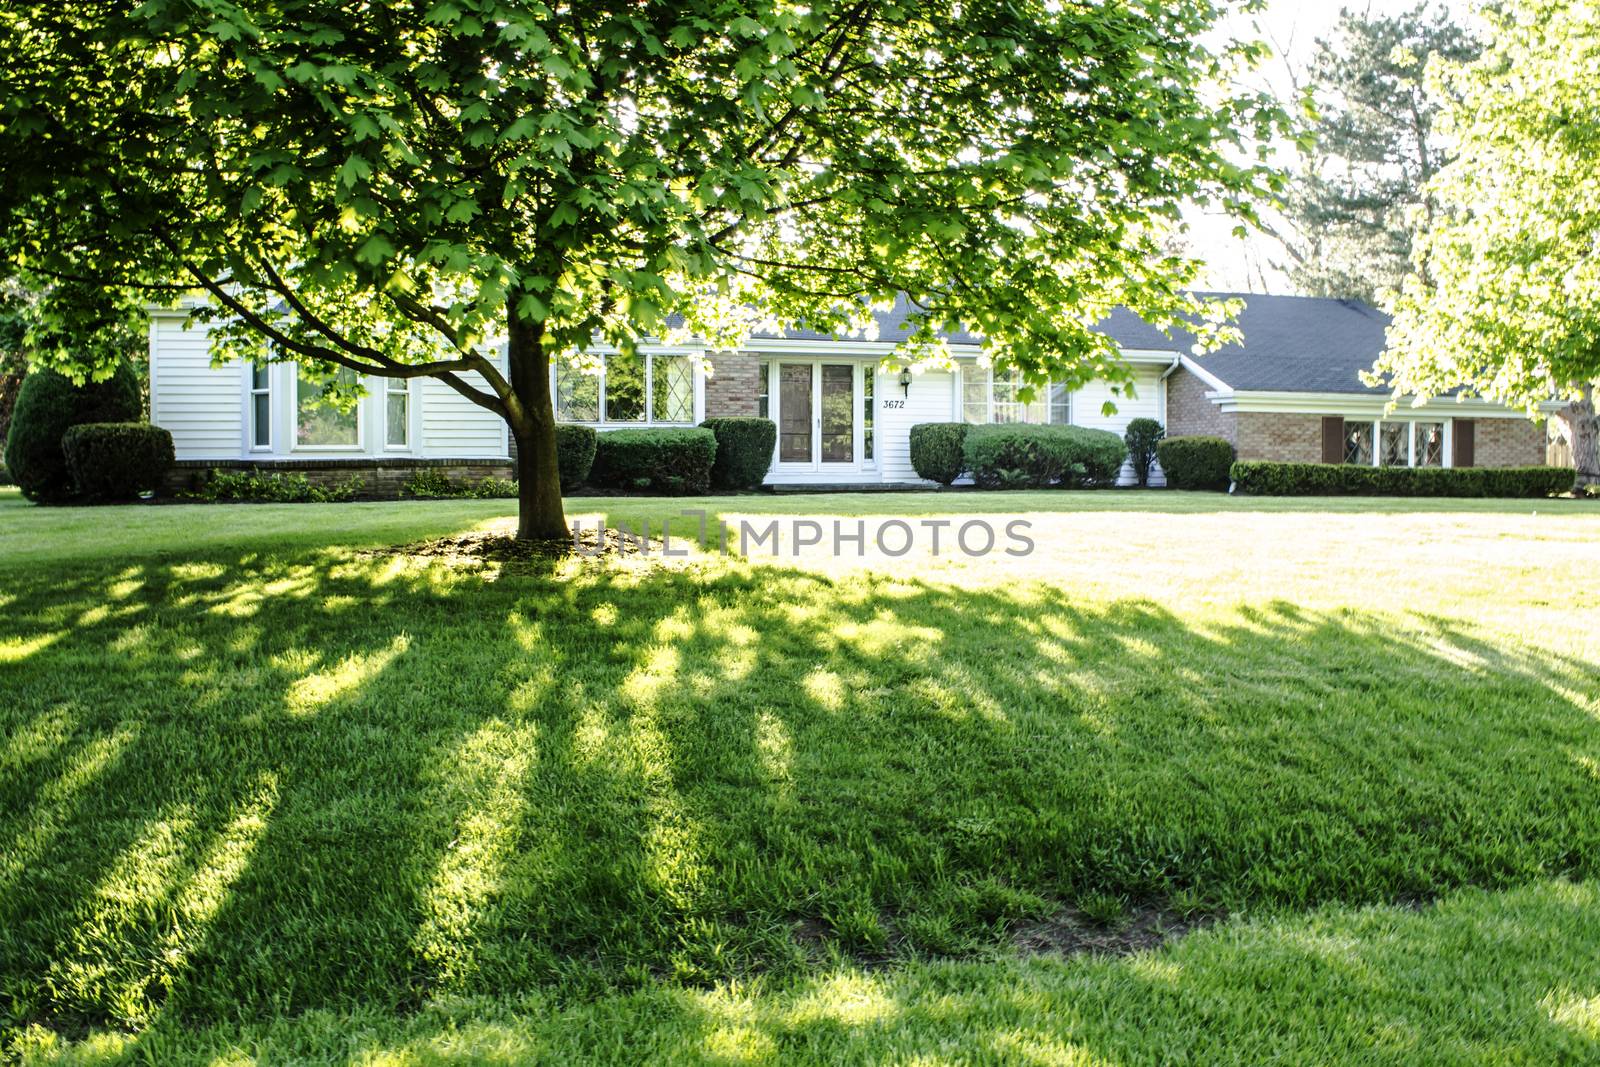 Shaded front lawn of a brick ranch style home with a bay window in the front.